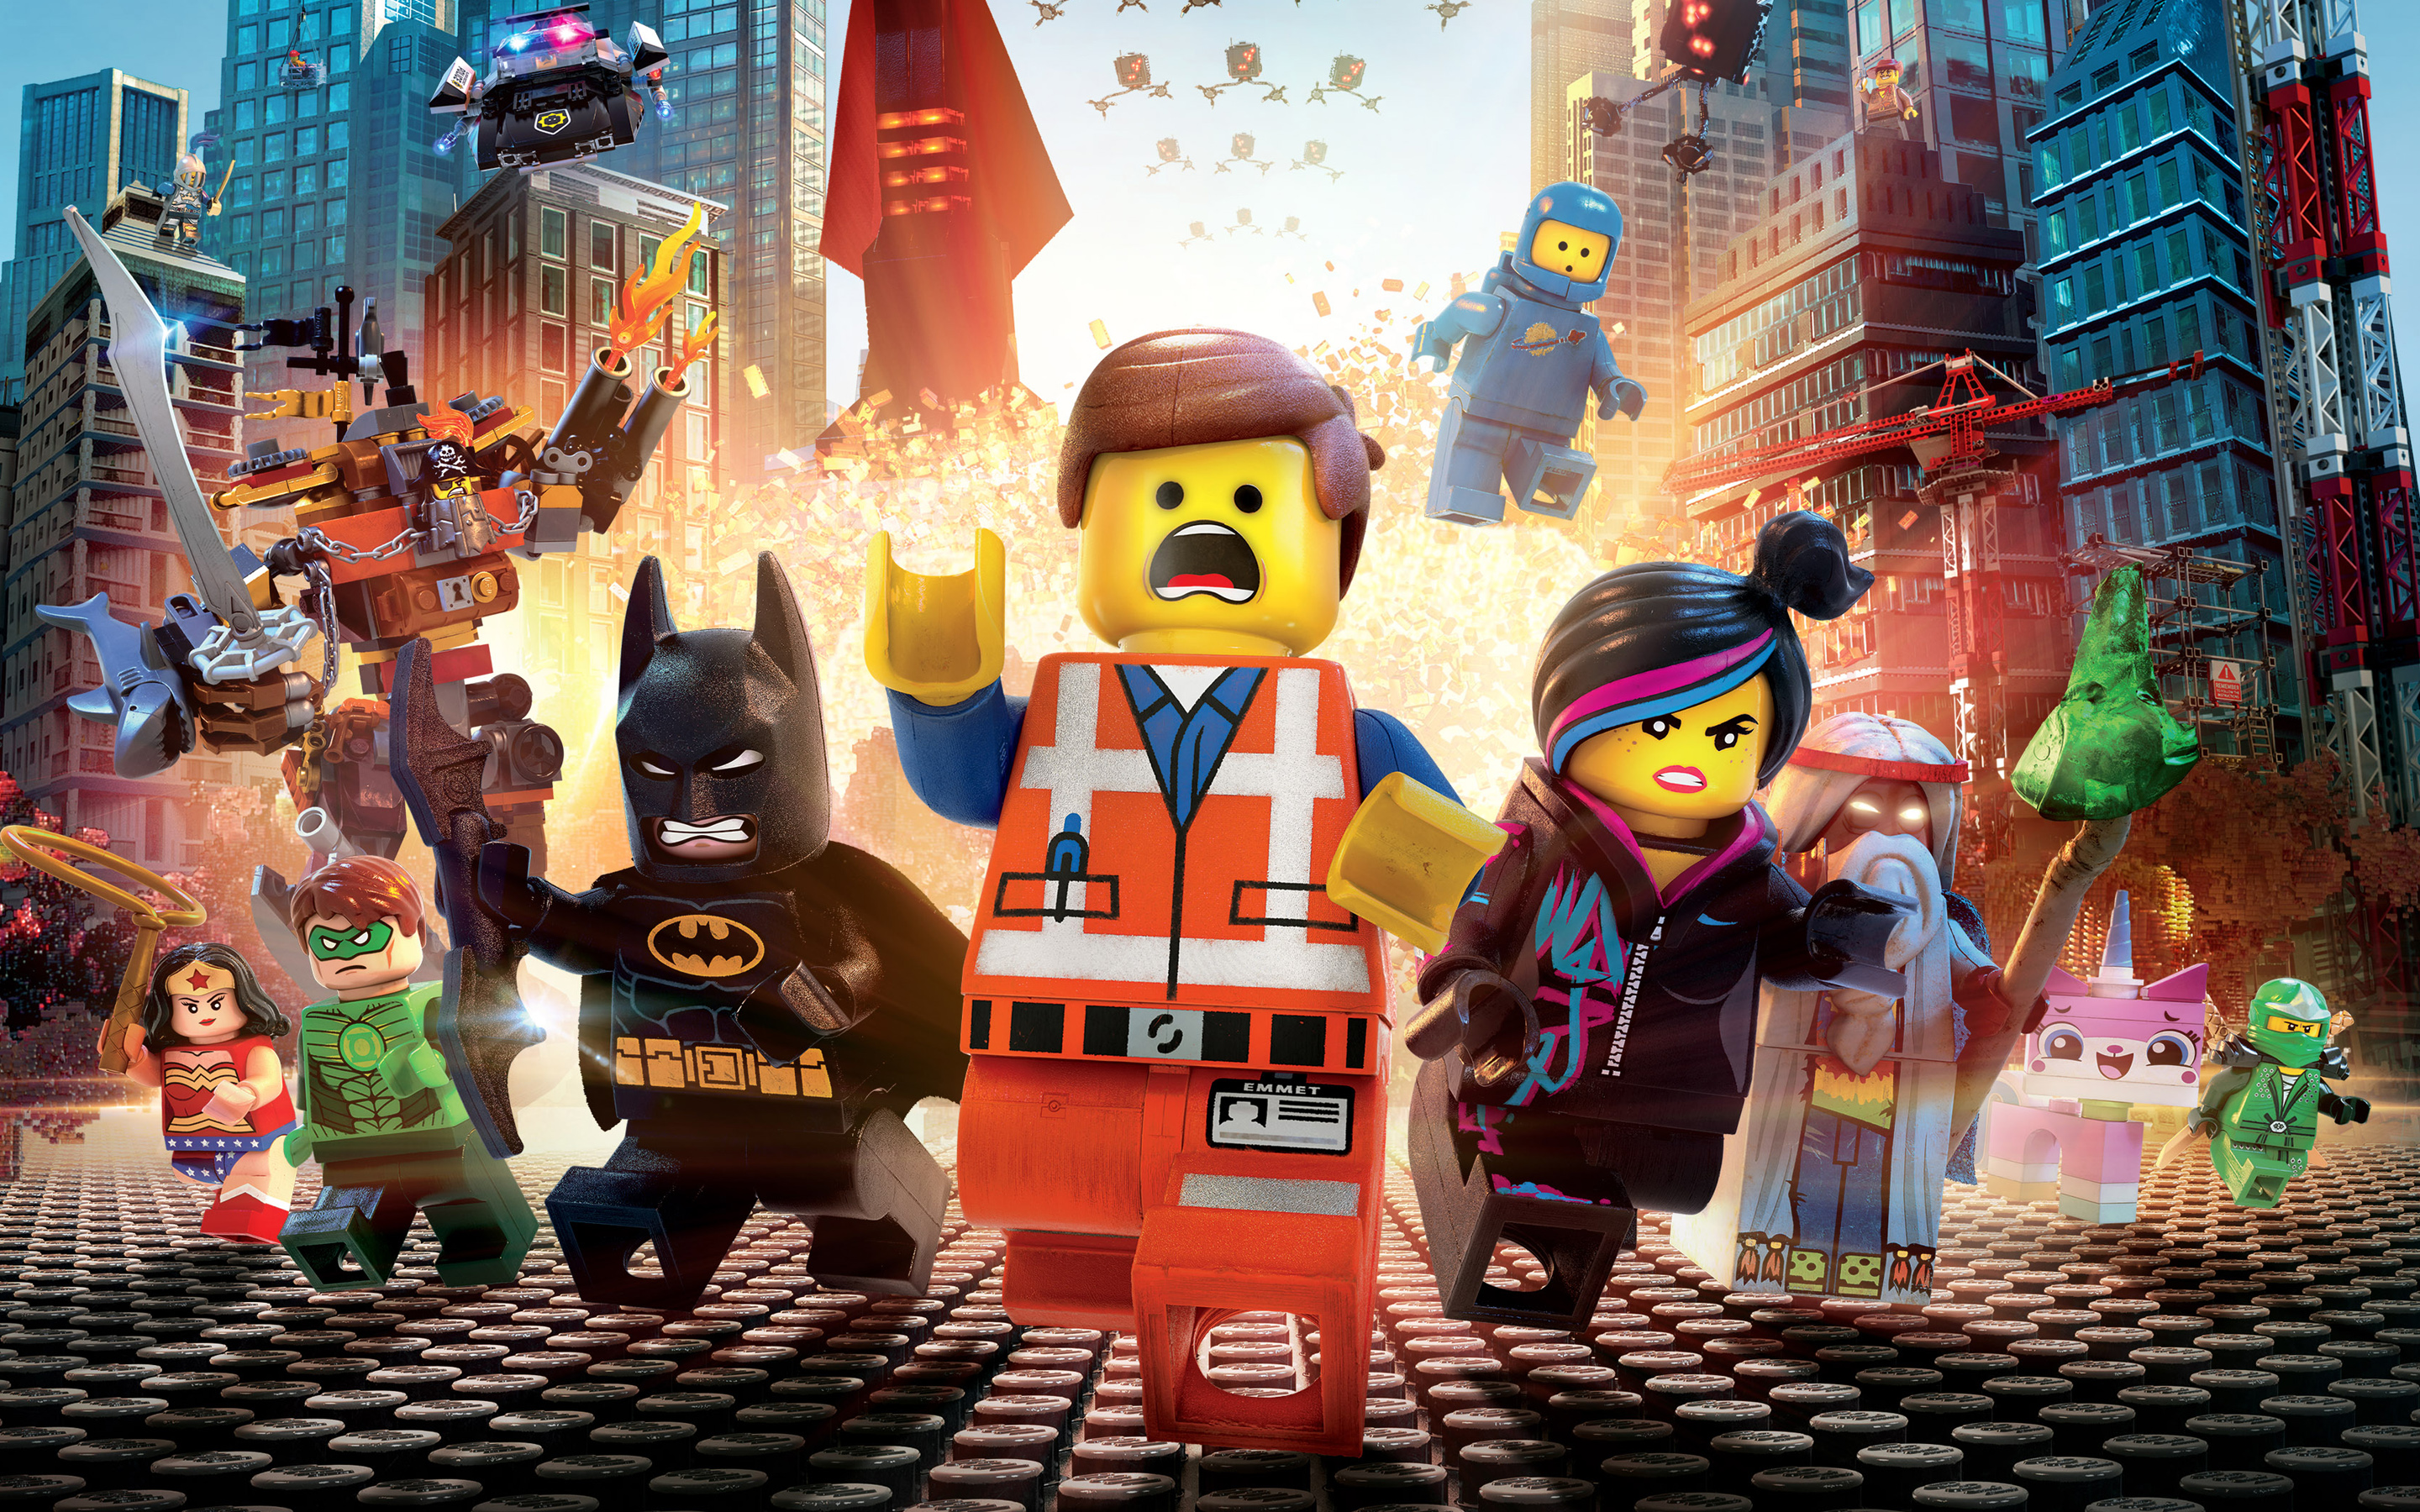 “THE LEGO MOVIE” ATTEMPTS TO MAKE COMMERCE INTO ART